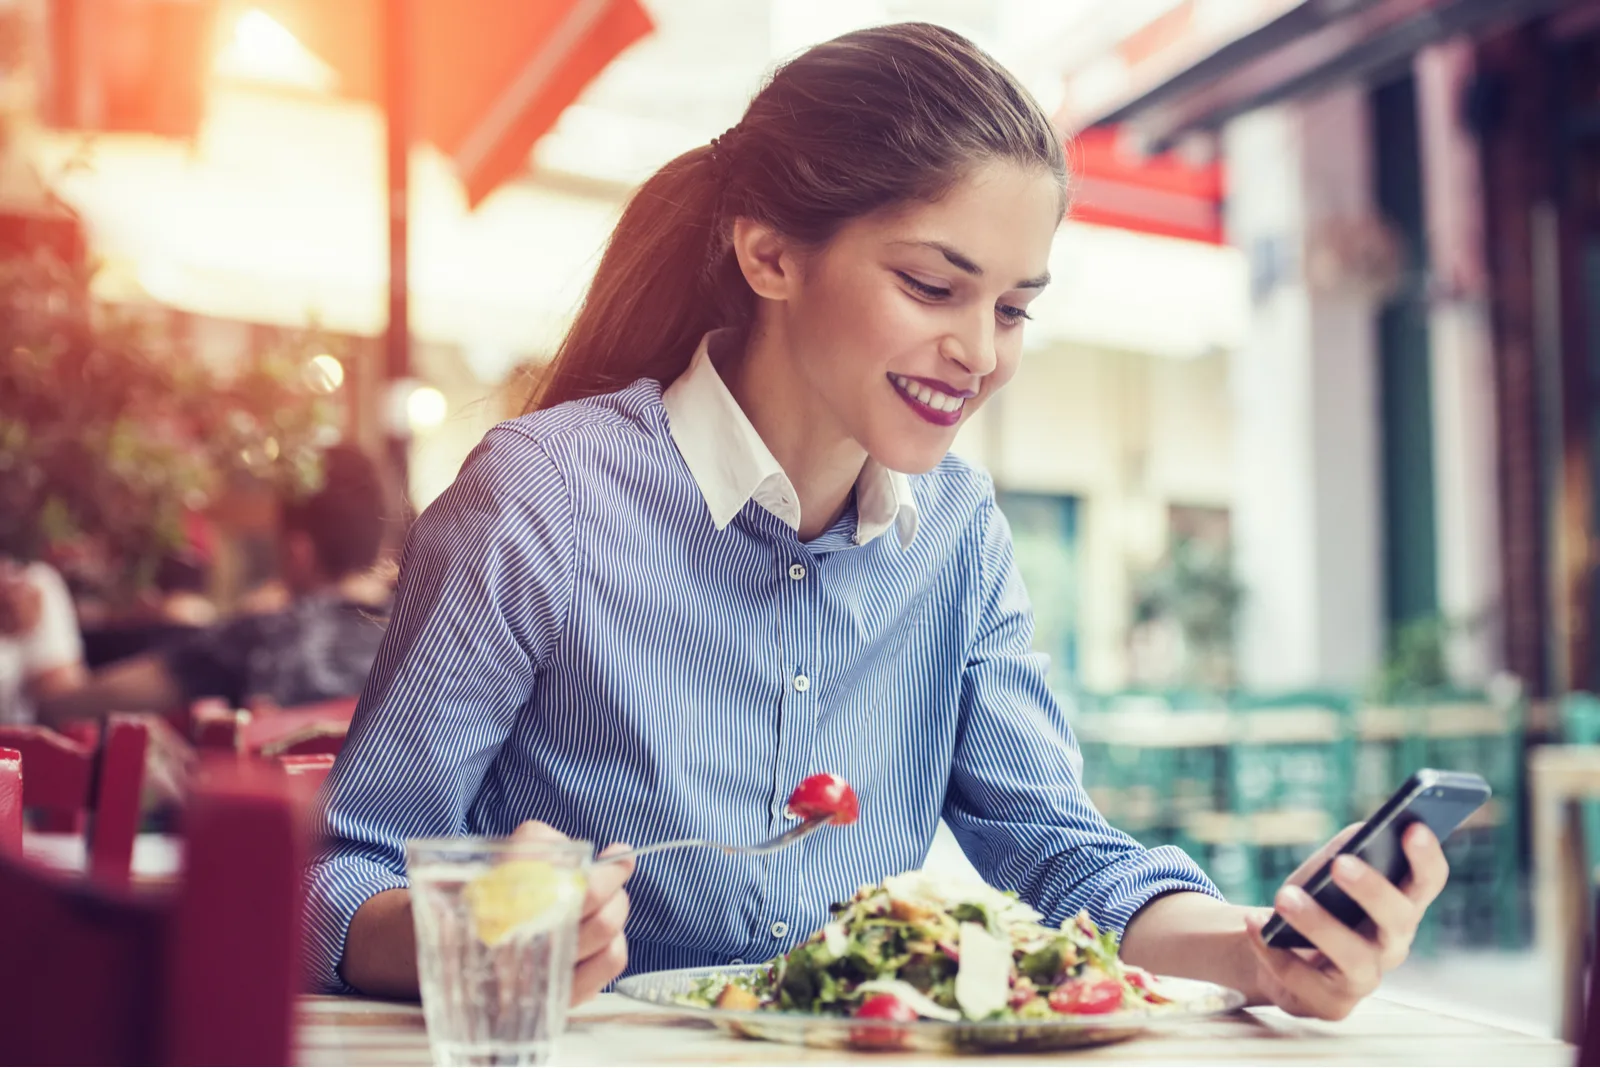 a smiling woman sitting at a table eating and holding a phone in her hand